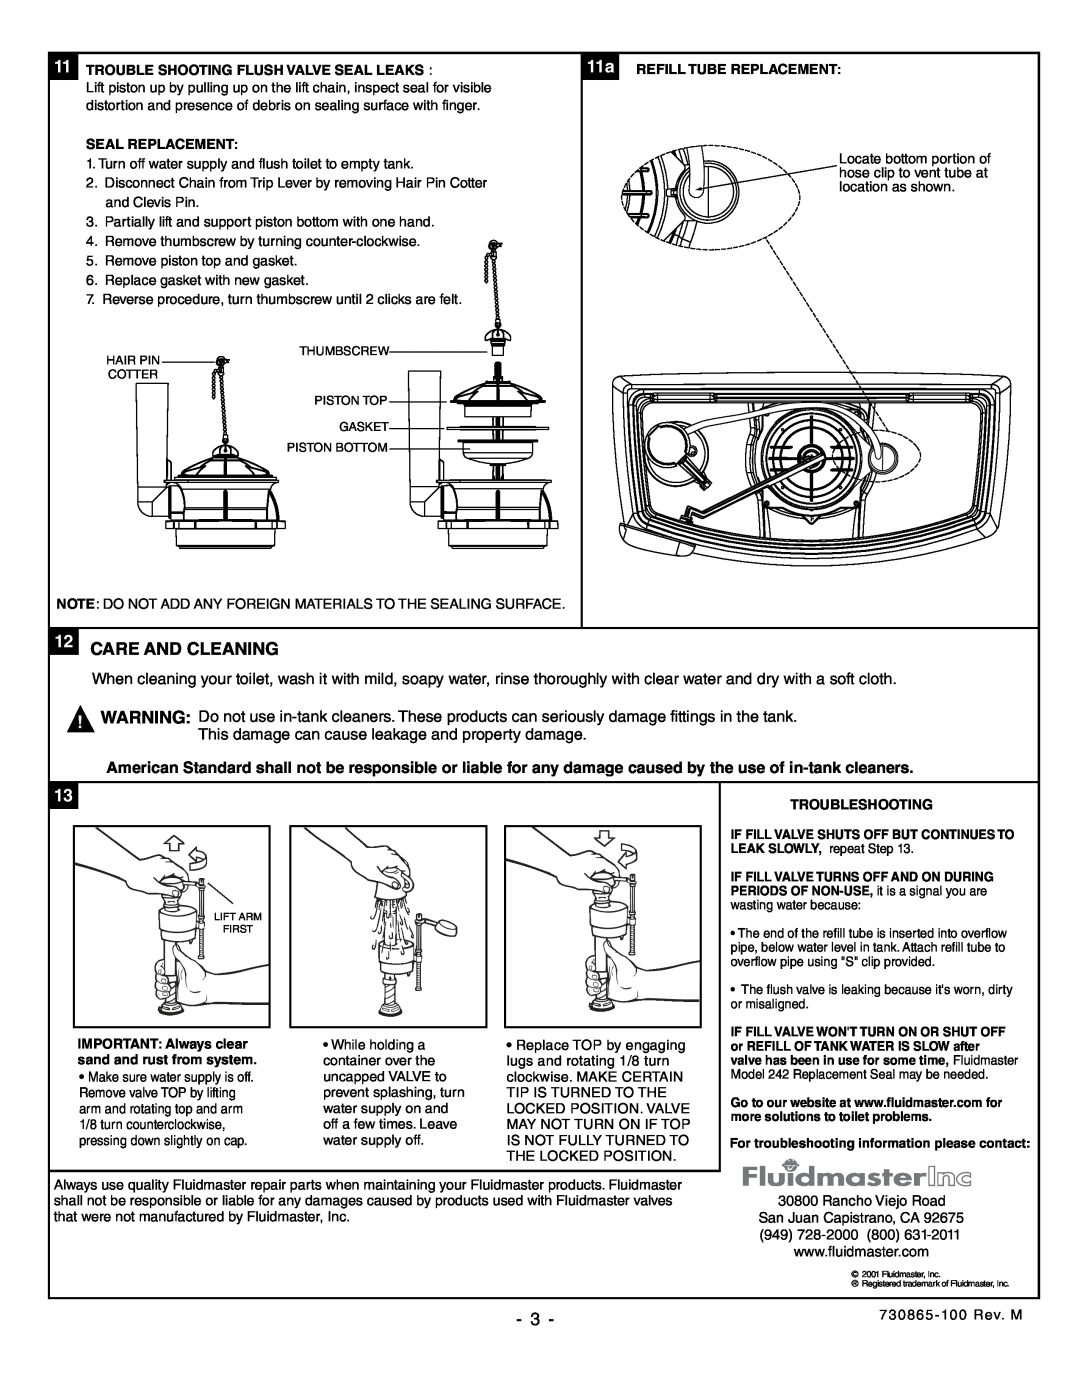 American Standard 2034, 2004 Care And Cleaning, Trouble Shooting Flush Valve Seal Leaks, Seal Replacement, Troubleshooting 